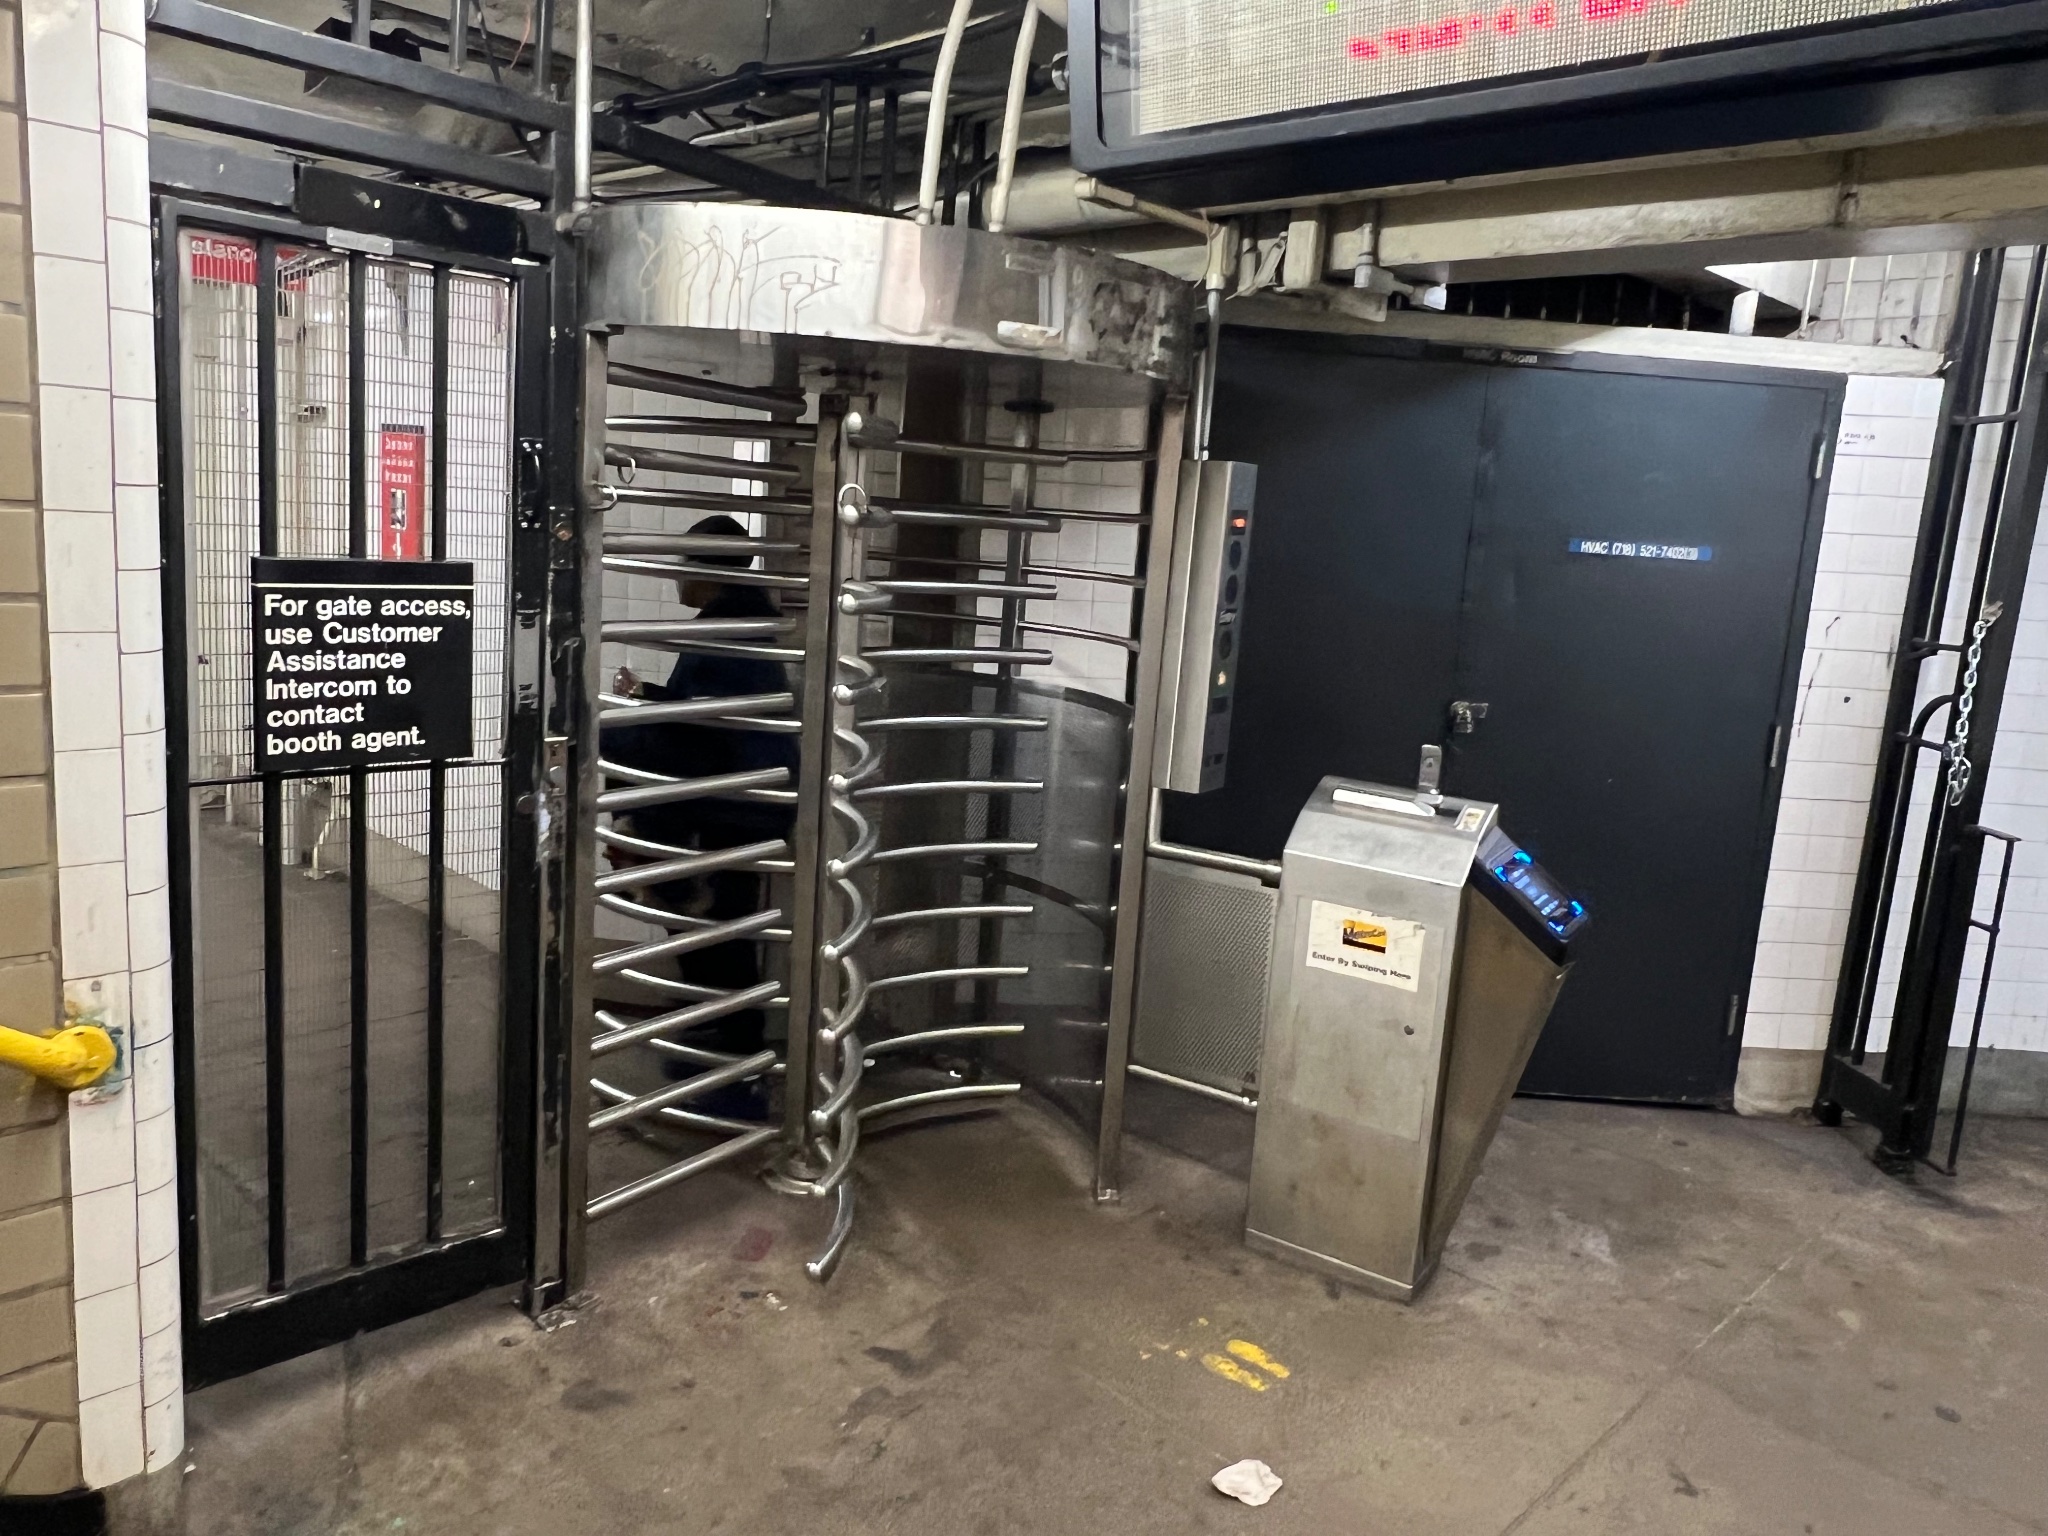 The single turnstile riders crowded their way through in an attempt to flee the subway after a shooting at a nearby stop on Thursday.